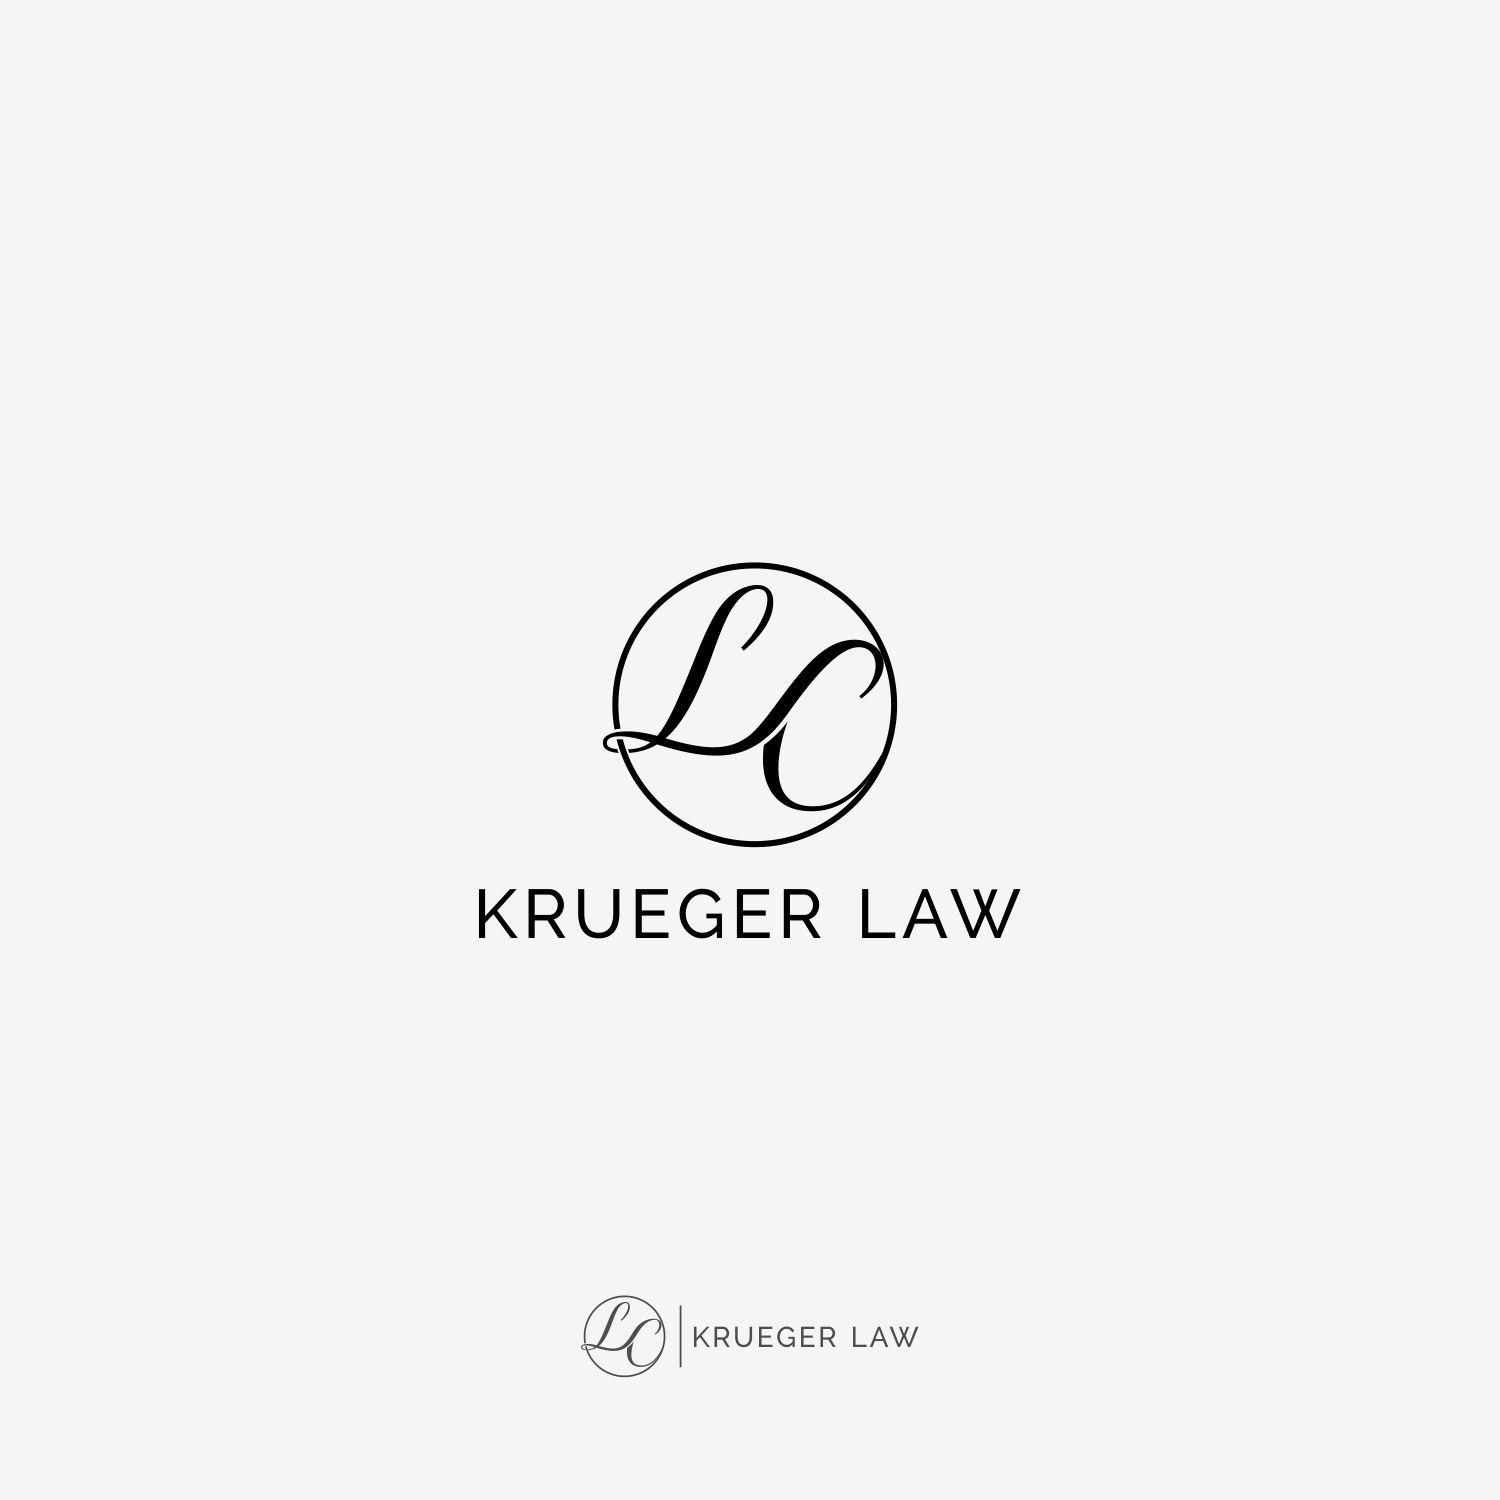 LC Soccer Logo - Professional, Conservative, Law Firm Logo Design for LC Krueger Law ...